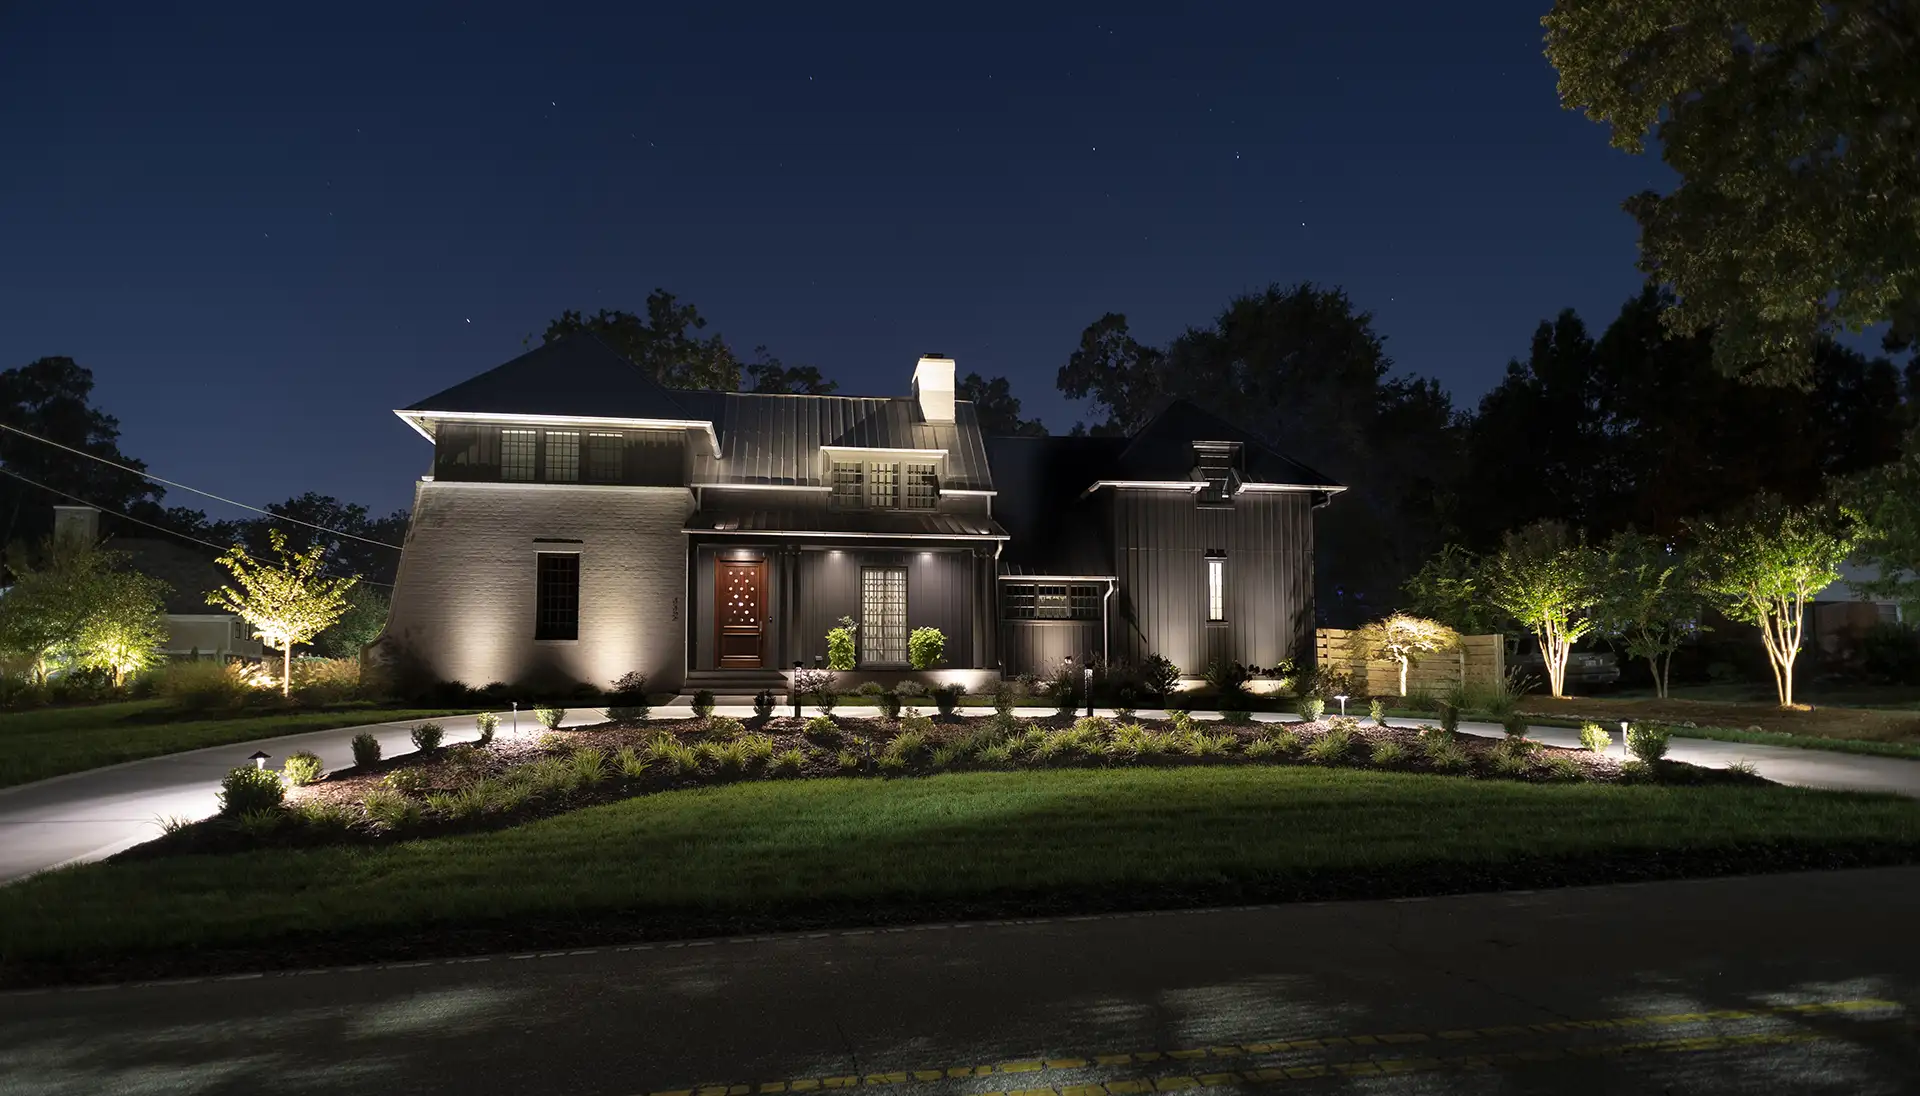 Raleigh Contemporary image 3 front view driveway night Lighthouse Outdoor Lighting and Audio Greensboro NC